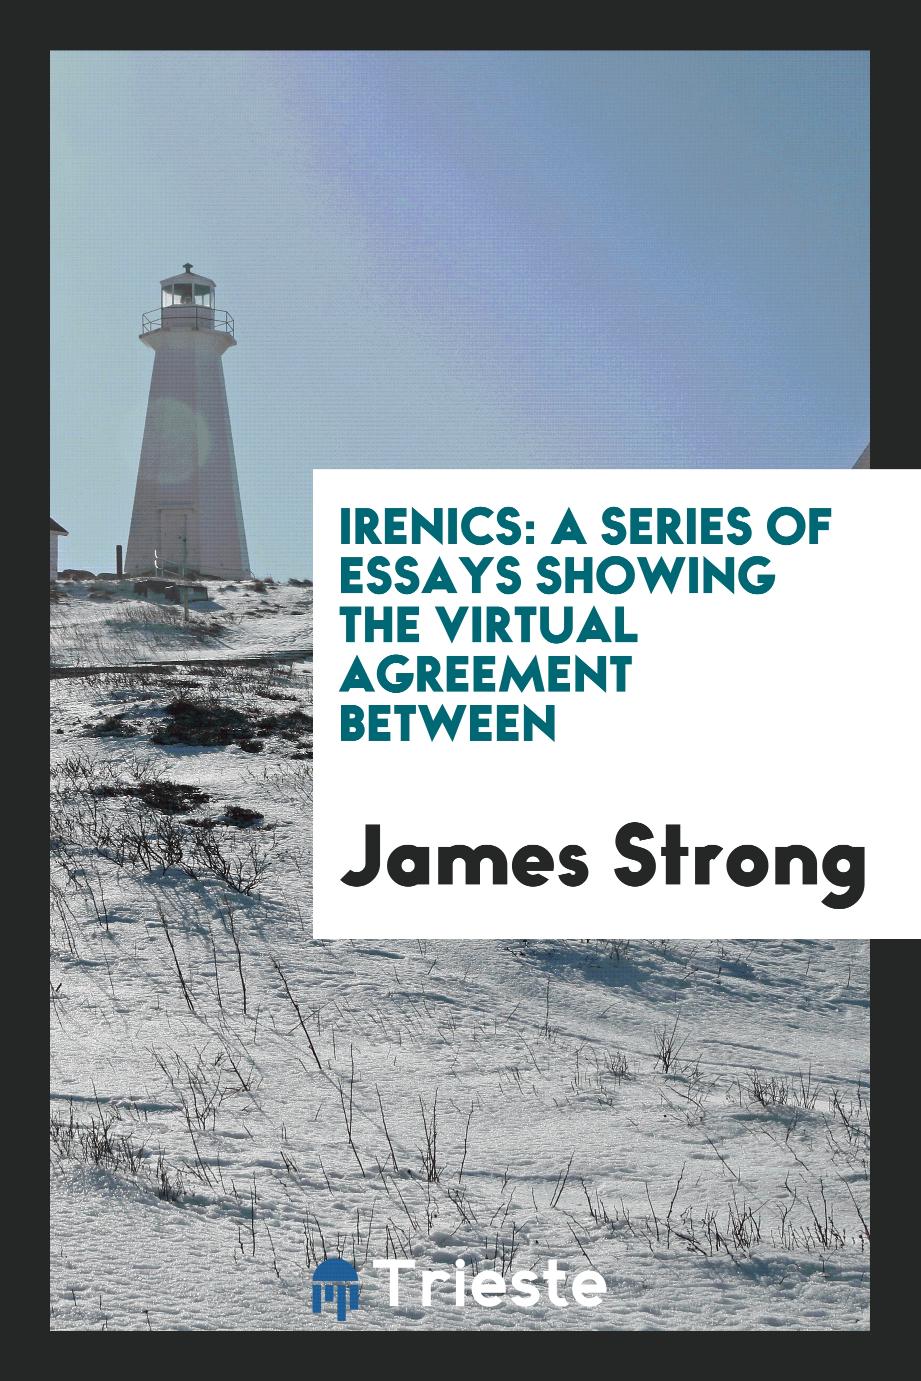 Irenics: A Series of Essays Showing the Virtual Agreement Between